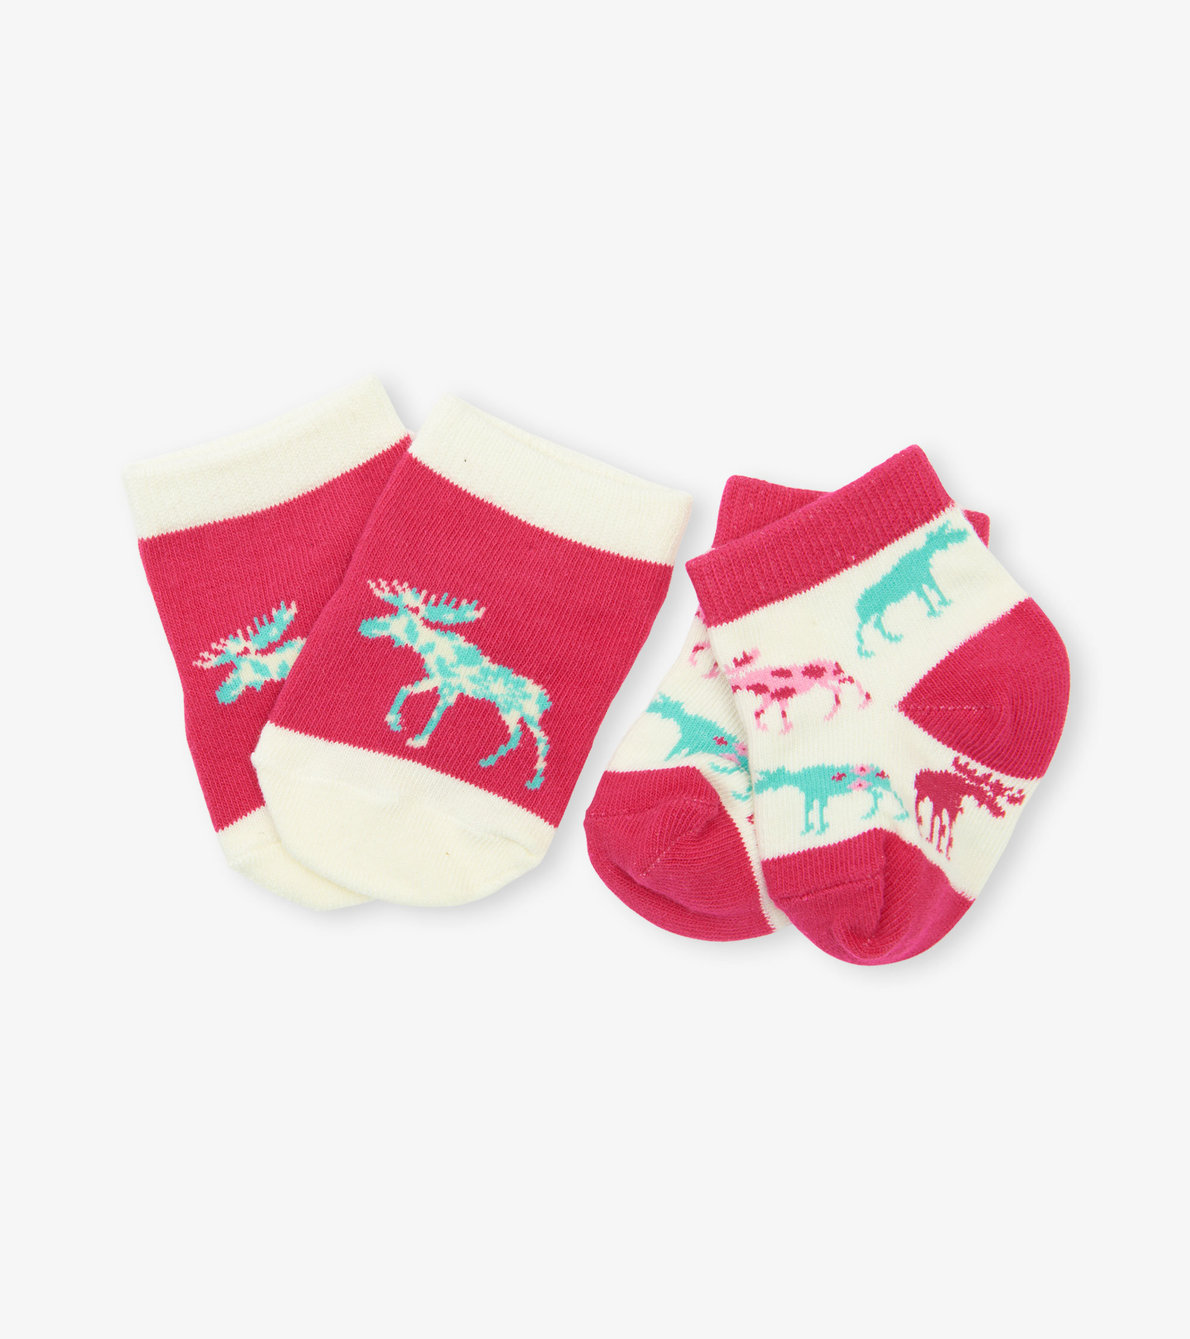 View larger image of Patterned Moose 2-Pack Baby Socks